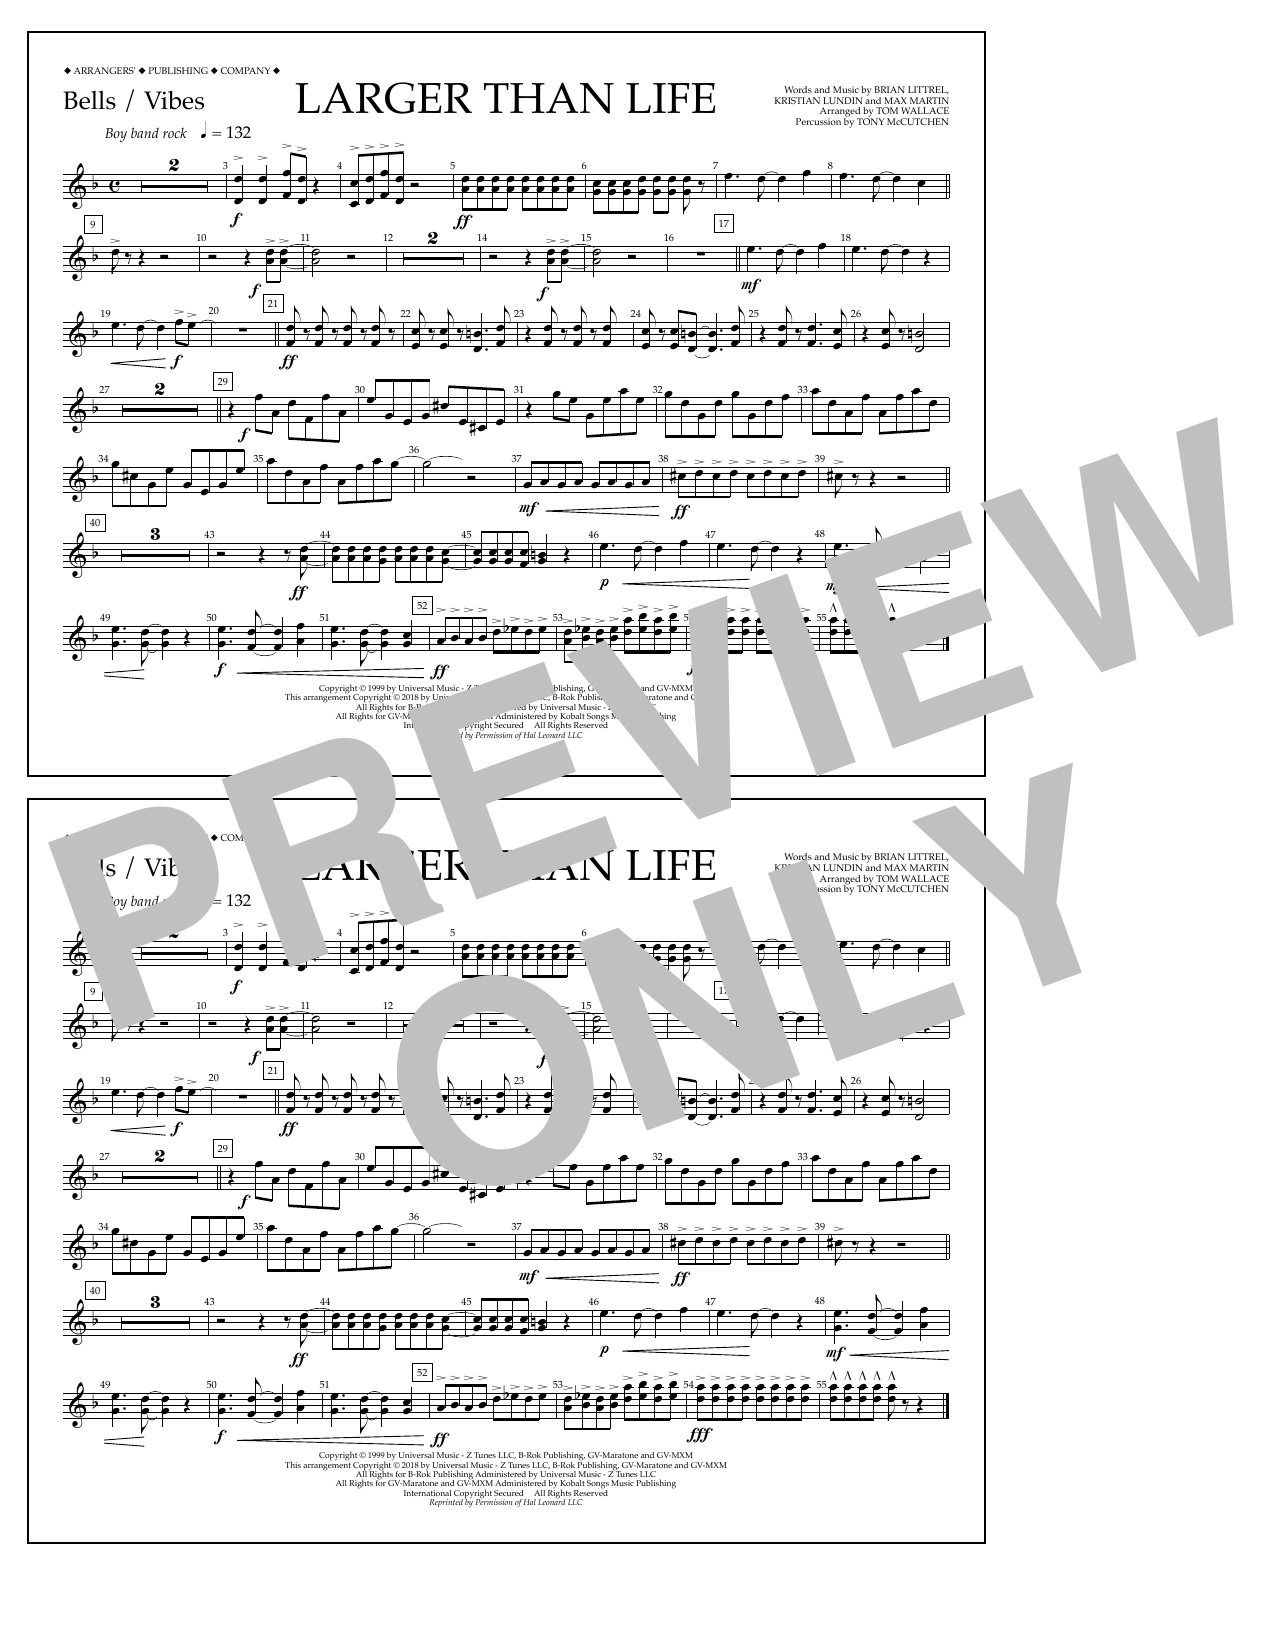 Download Tom Wallace Larger Than Life - Bells/Vibes Sheet Music